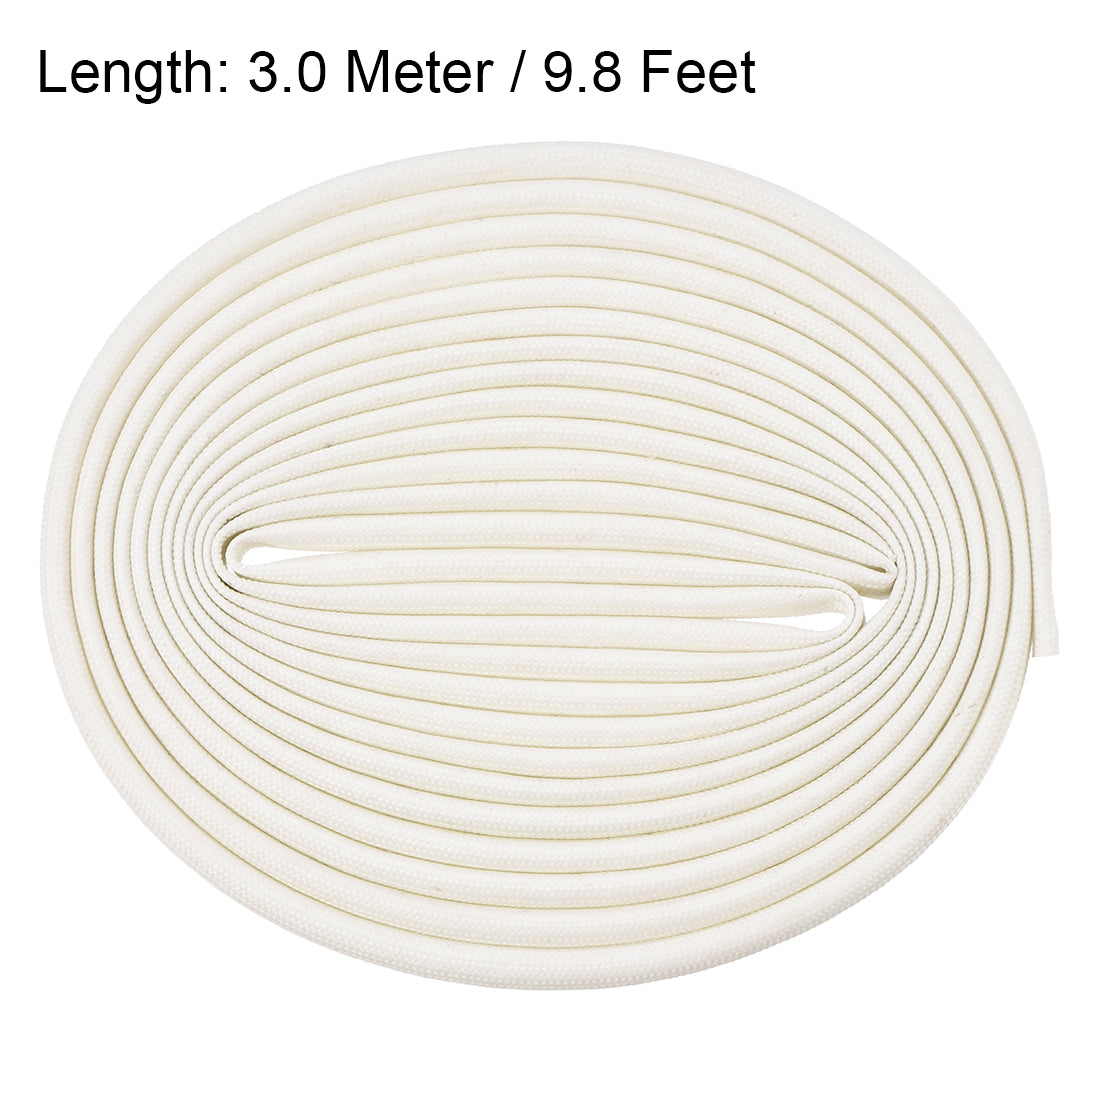 uxcell Uxcell Insulation Cable Protector, 9.8Ft-3mm High TEMP Silicone Fiberglass Sleeve White